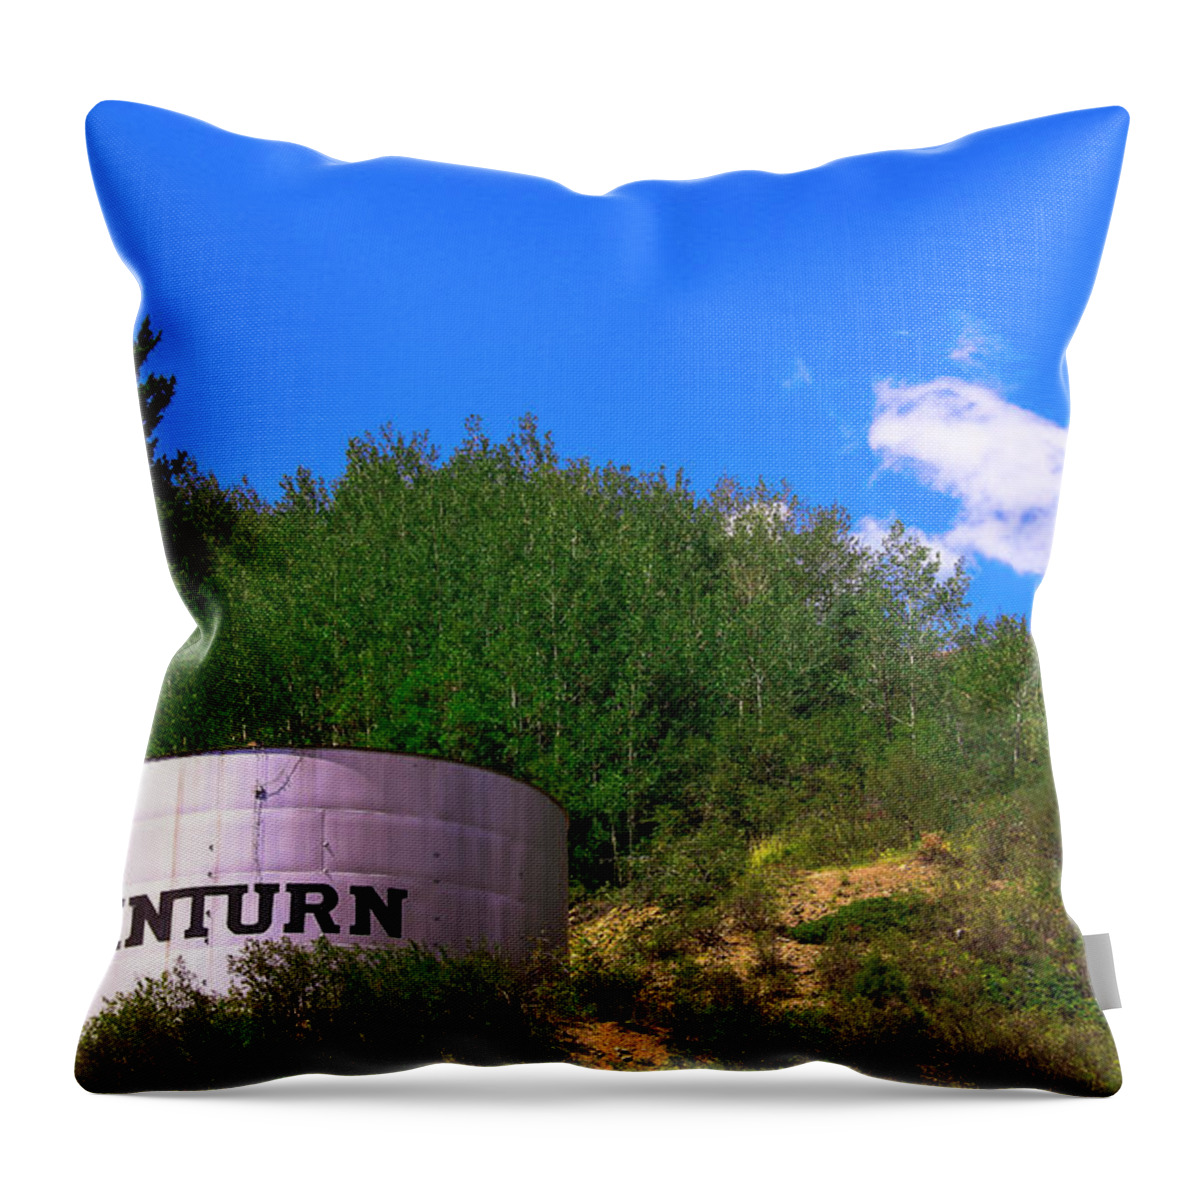 Minturn Throw Pillow featuring the photograph Minturn Water Tower by Ola Allen